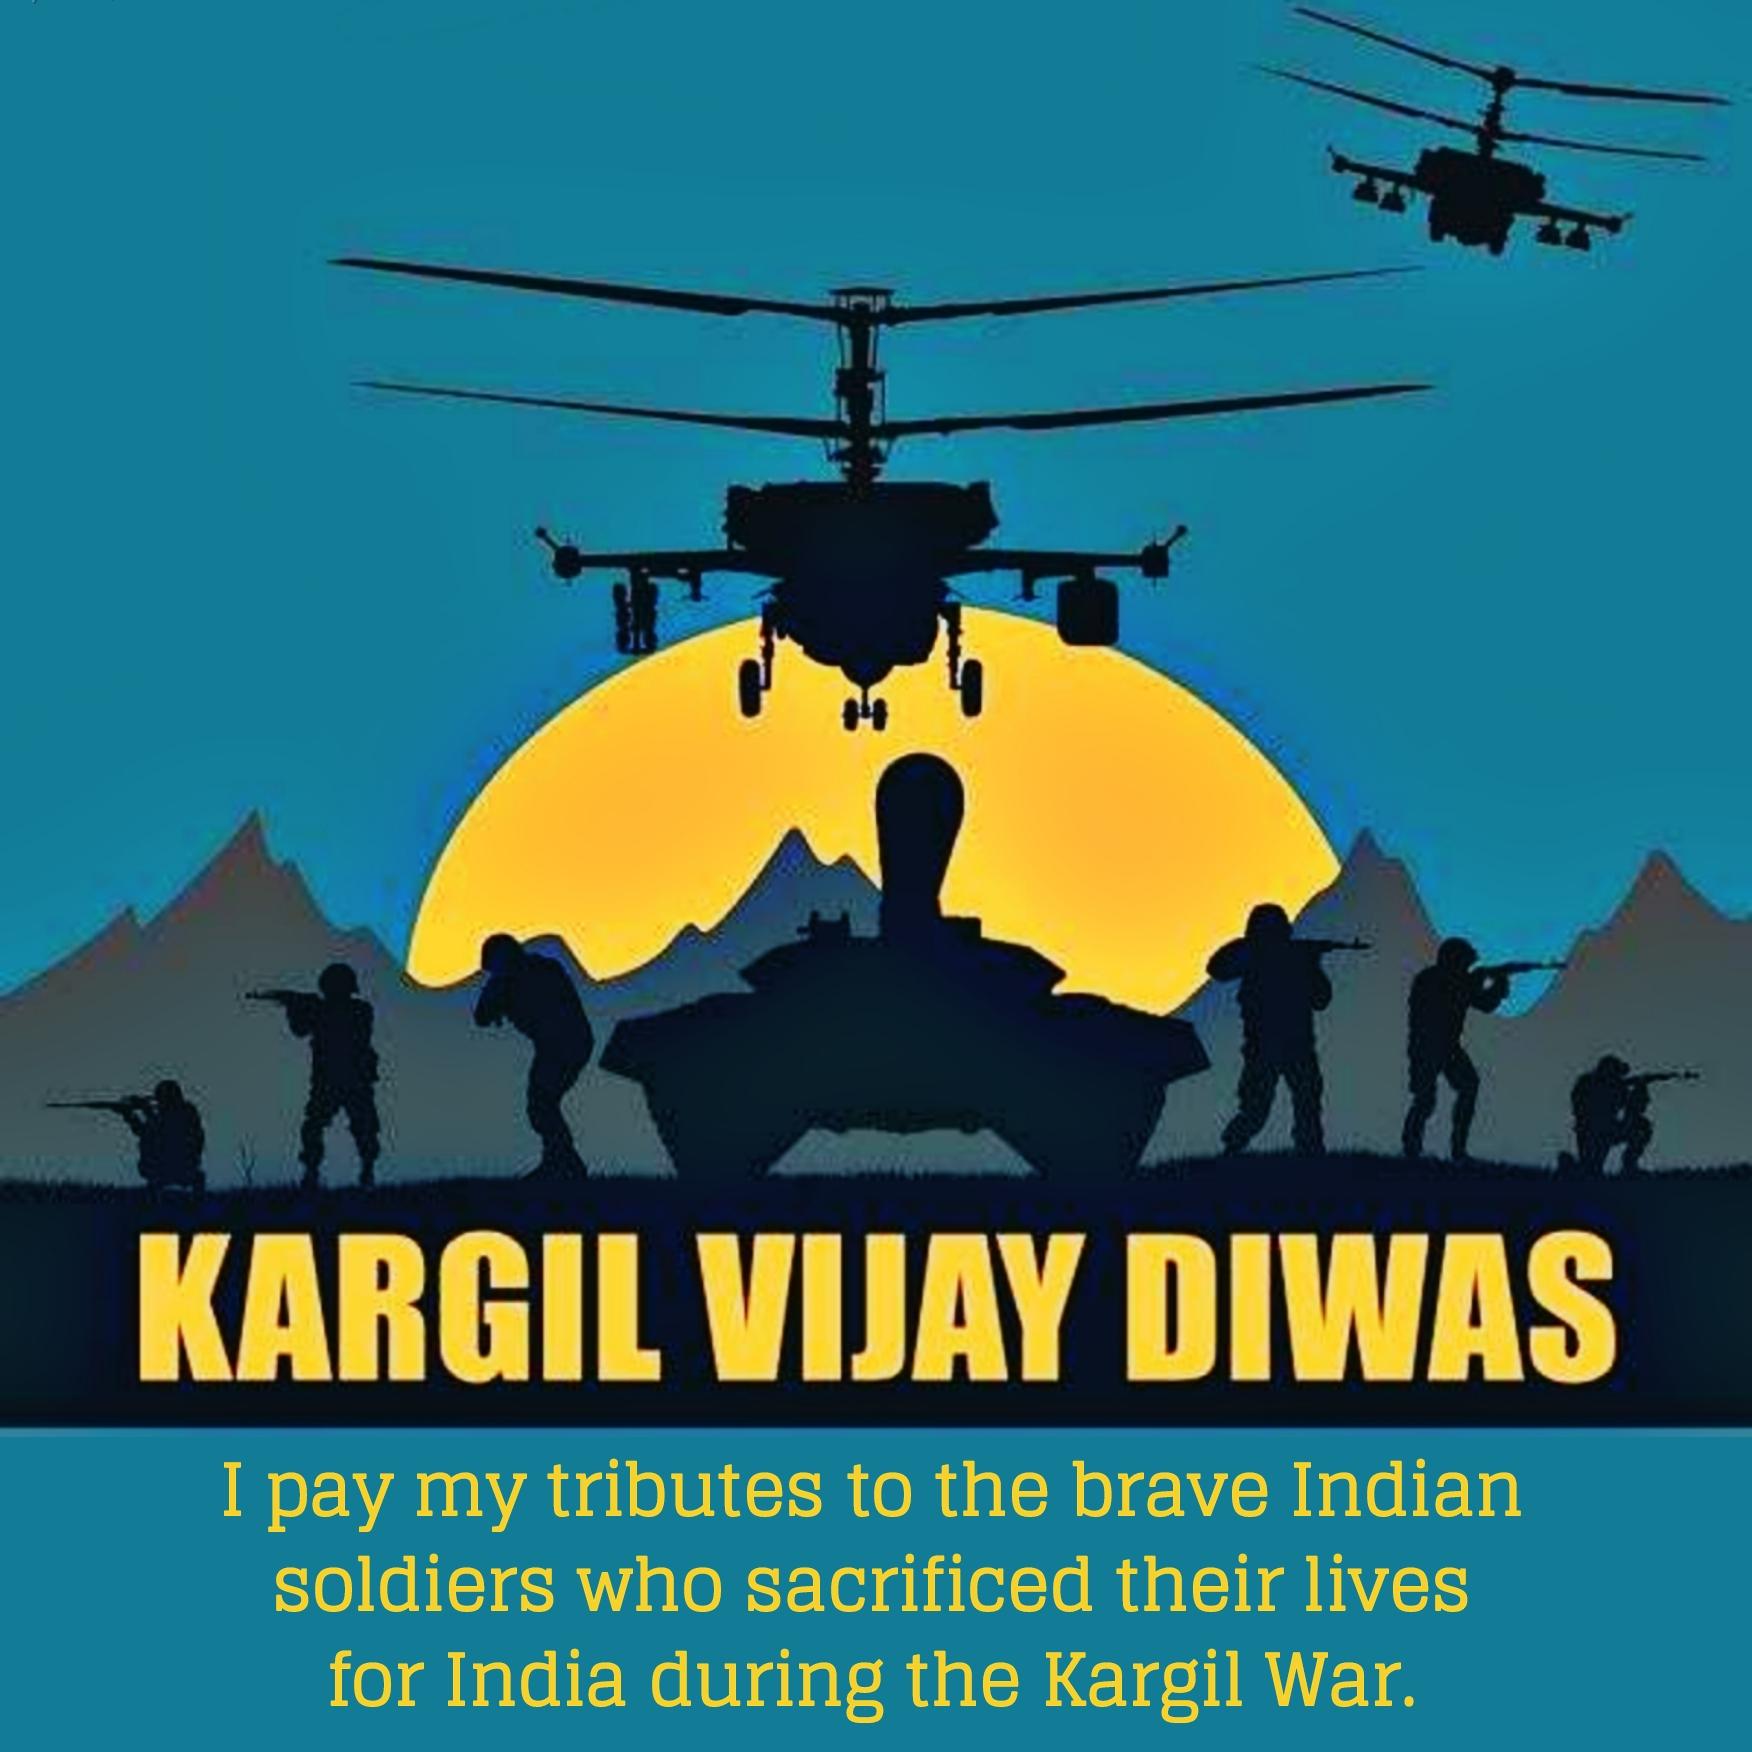 I pay my tributes to the brave Indian soldiers who sacrificed